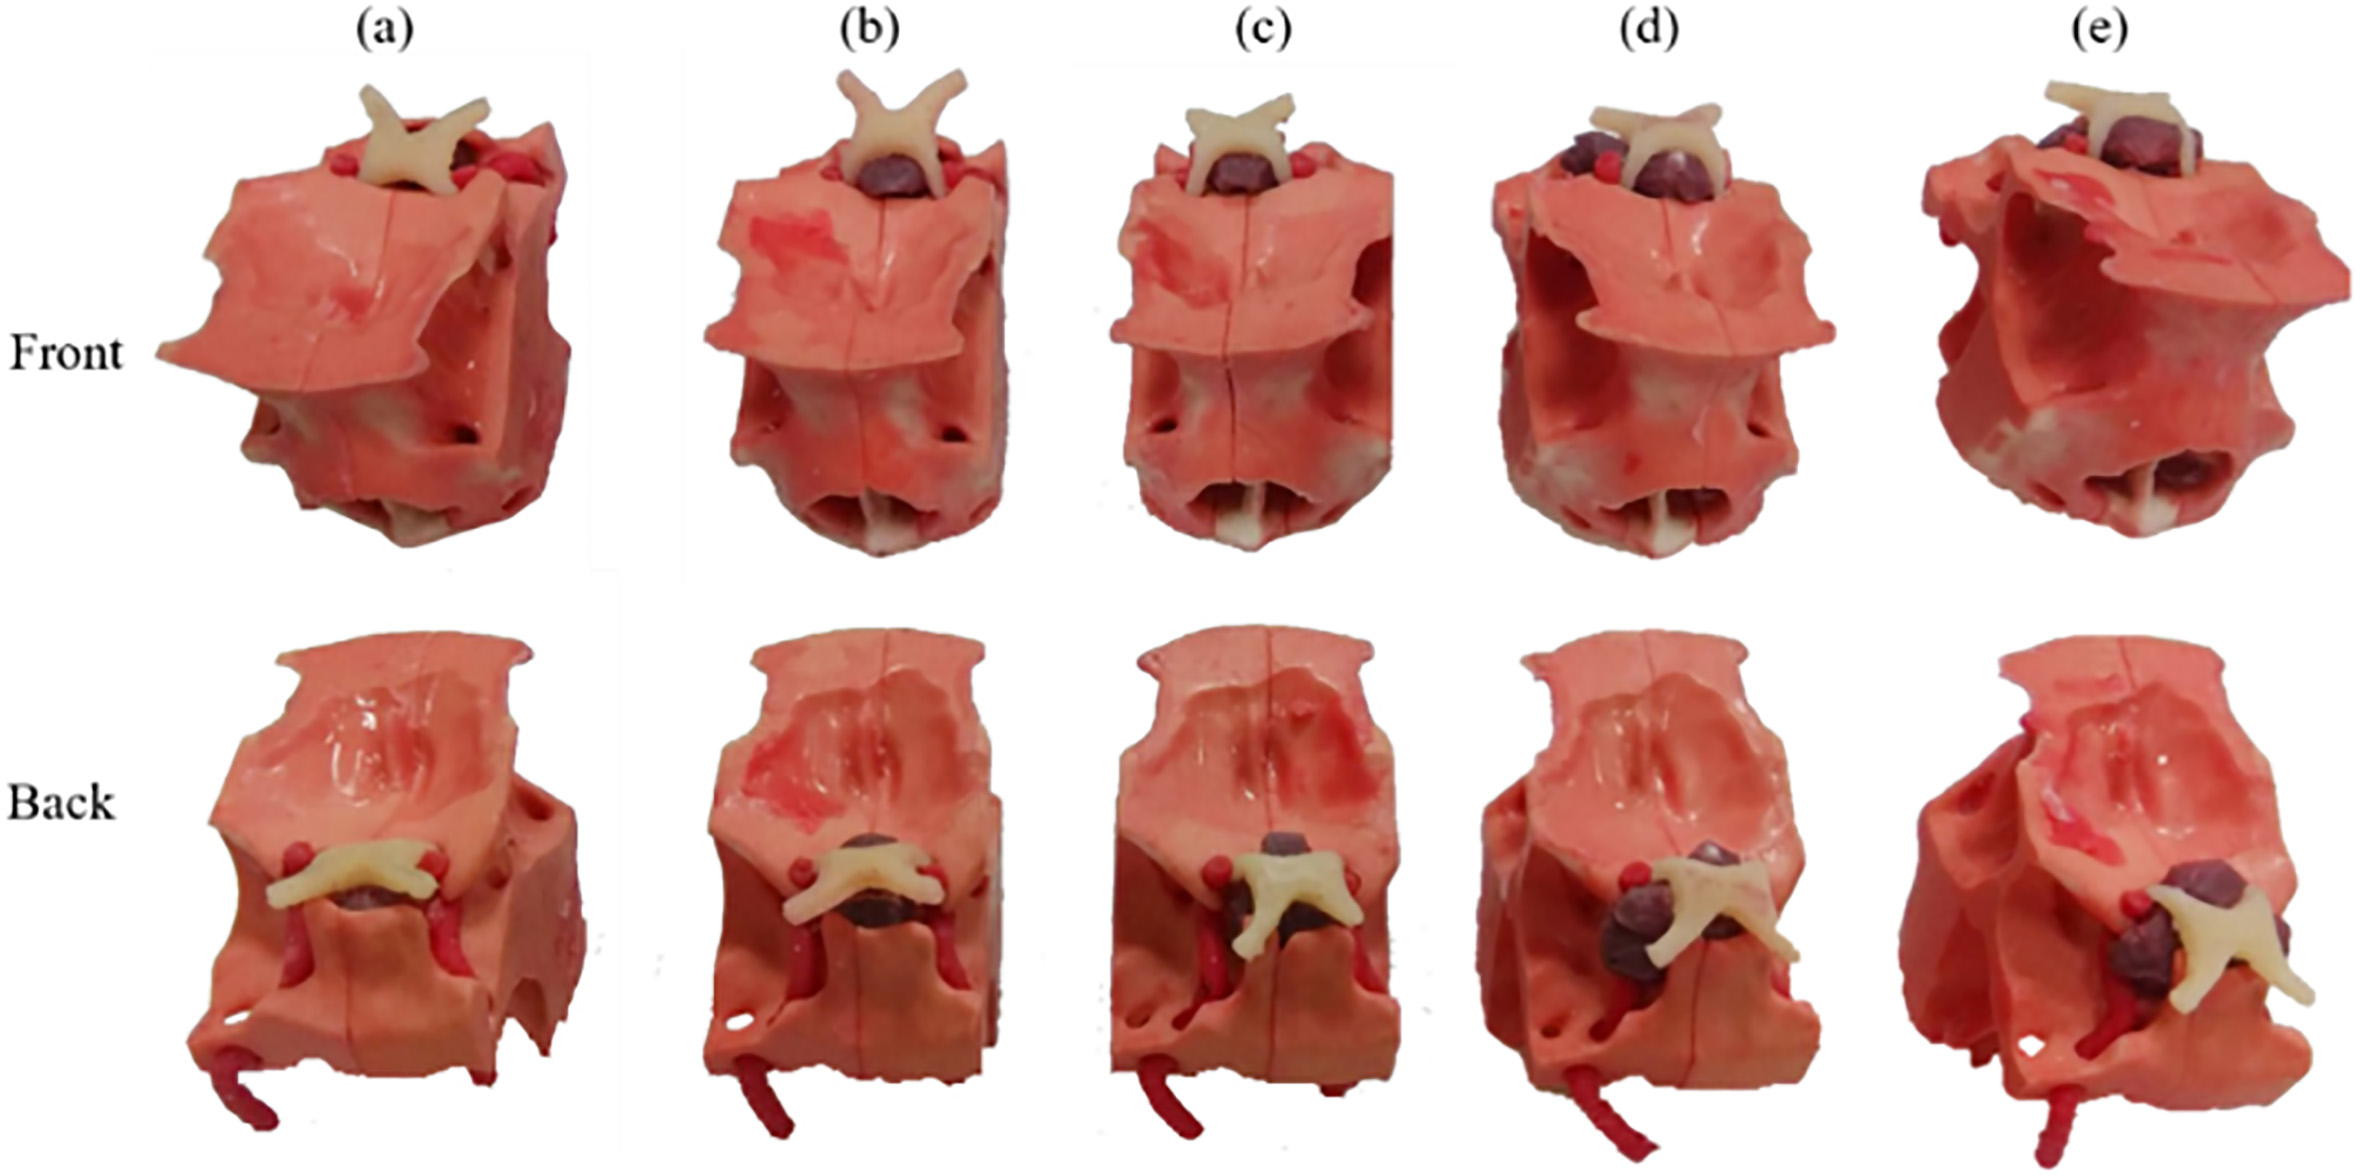 Surgical area models with different levels of tumors.